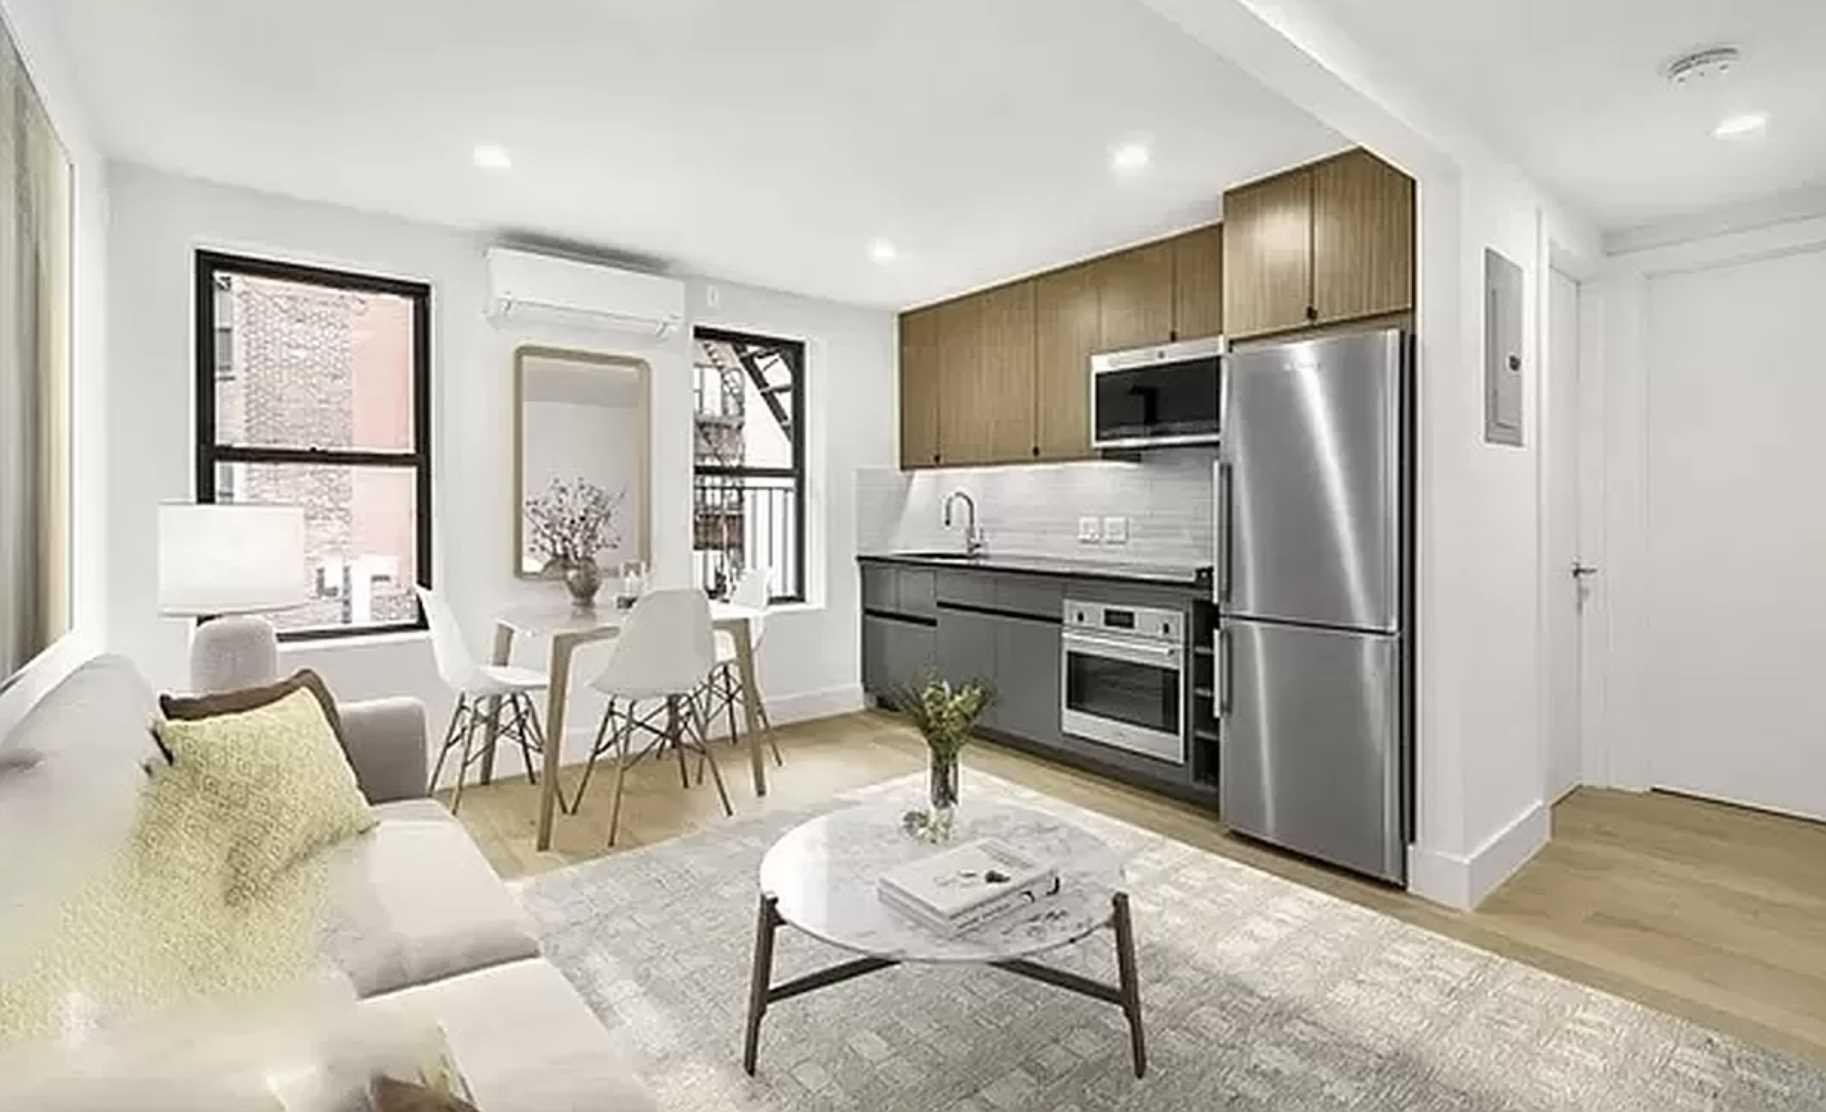 151 Ludlow Street 3, Lower East Side, Downtown, NYC - 2 Bedrooms  
1 Bathrooms  
4 Rooms - 